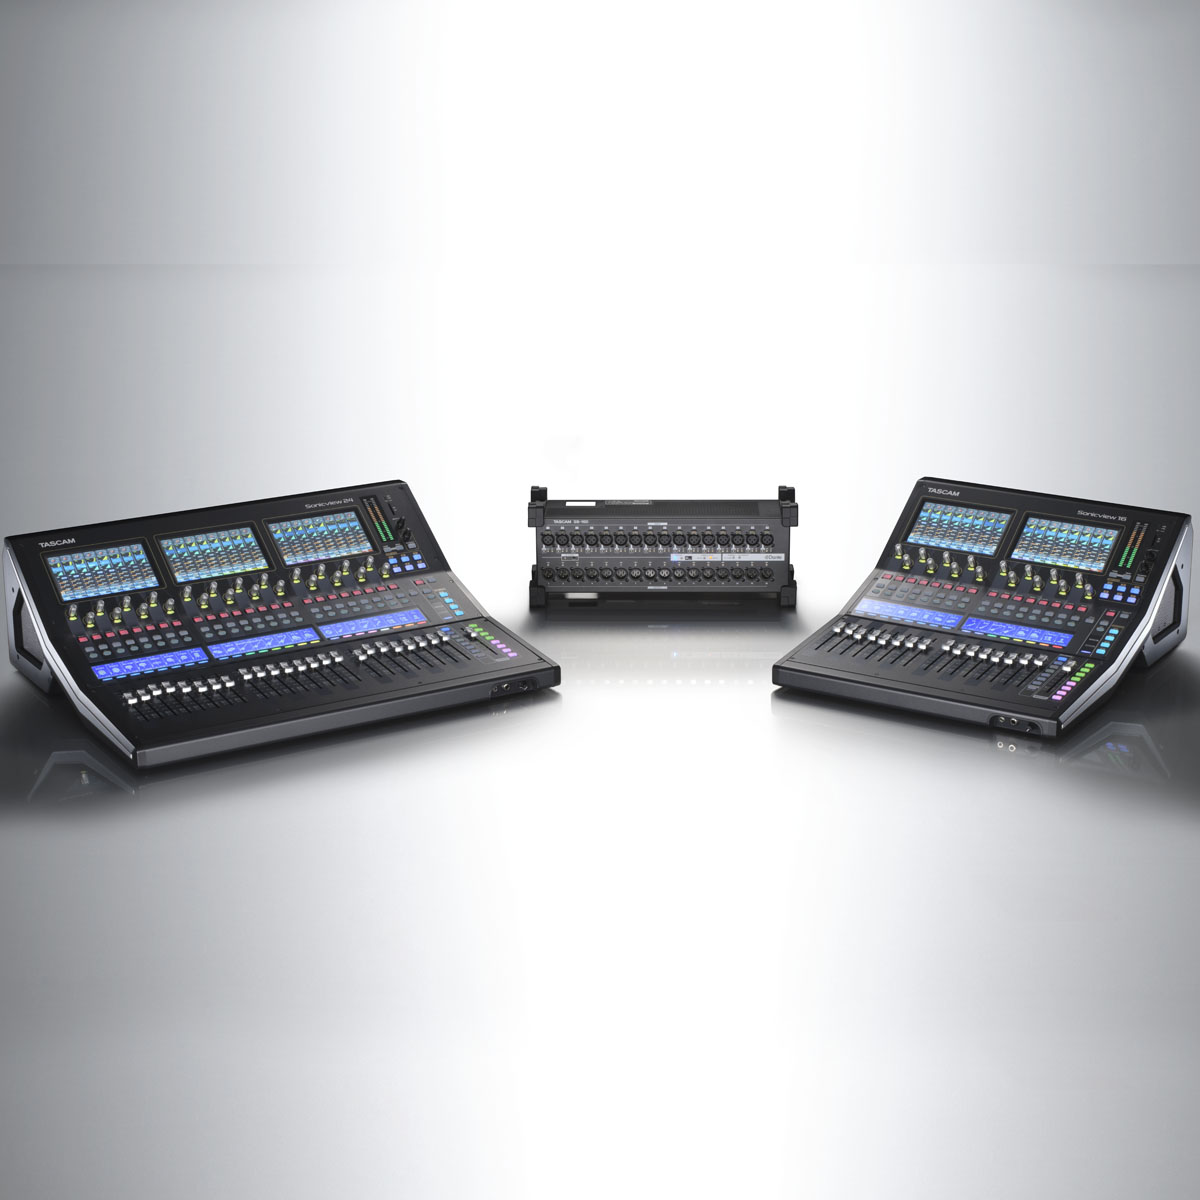 Announcement Regarding V1.6.0 Firmware for TASCAM Sonicview Series and V1.20 Firmware for SB-16D